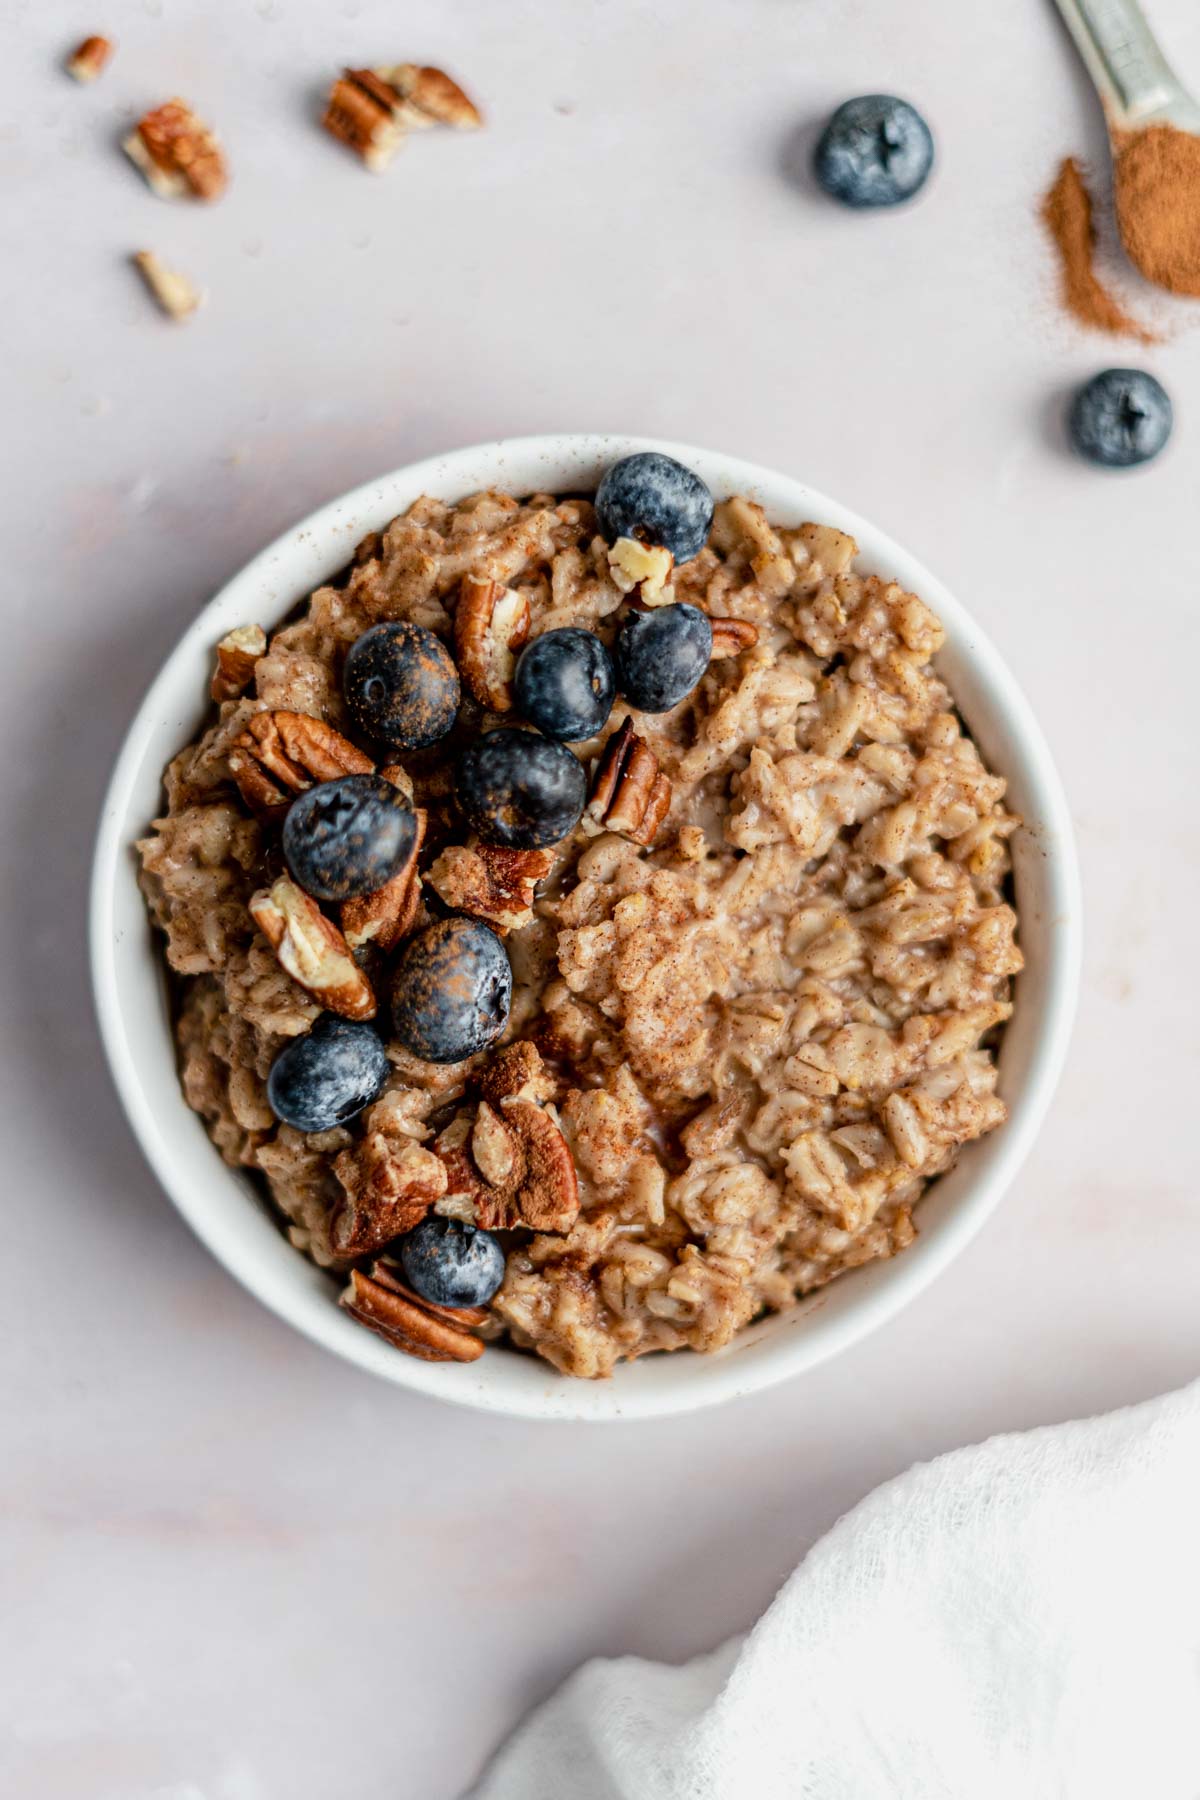 oatmeal in bowl with pecans, blueberries and cinnamon on top.